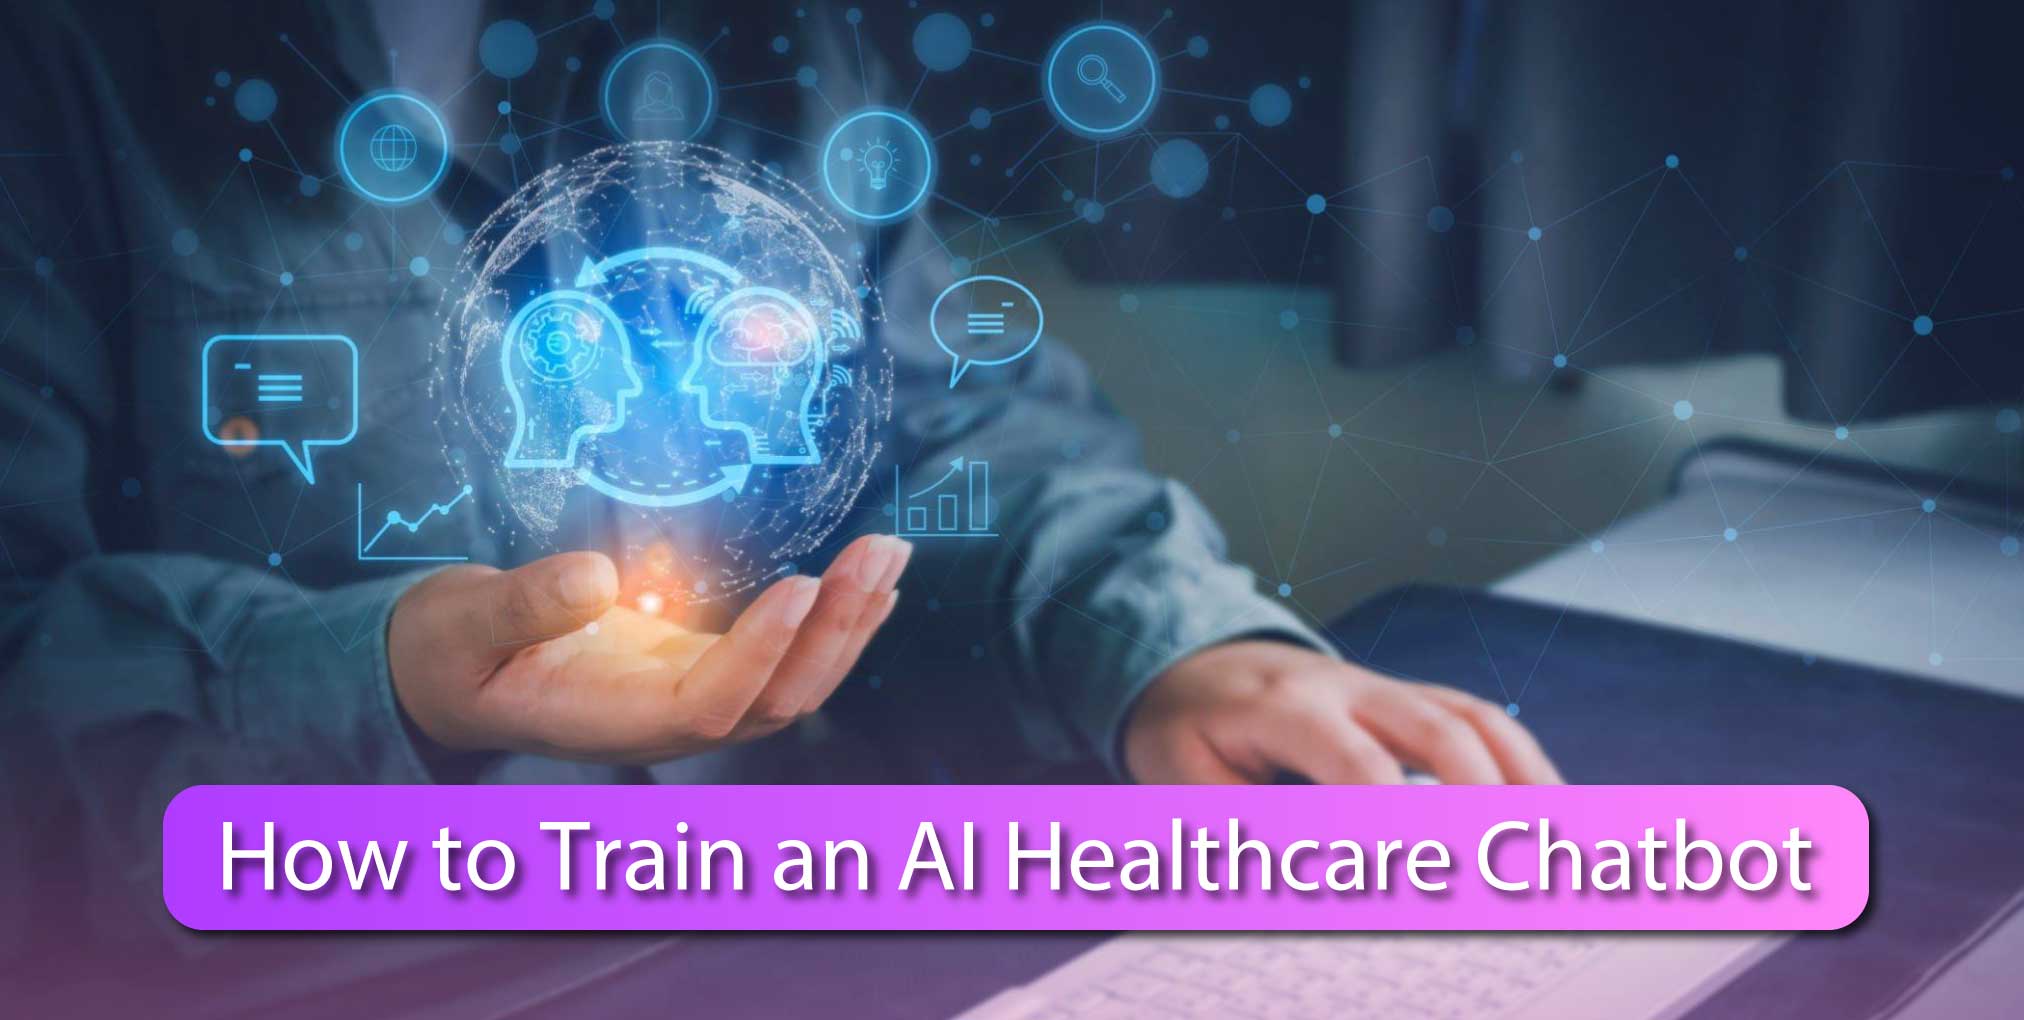 How to Train an AI Healthcare Chatbot: Top 10 Effective Tips